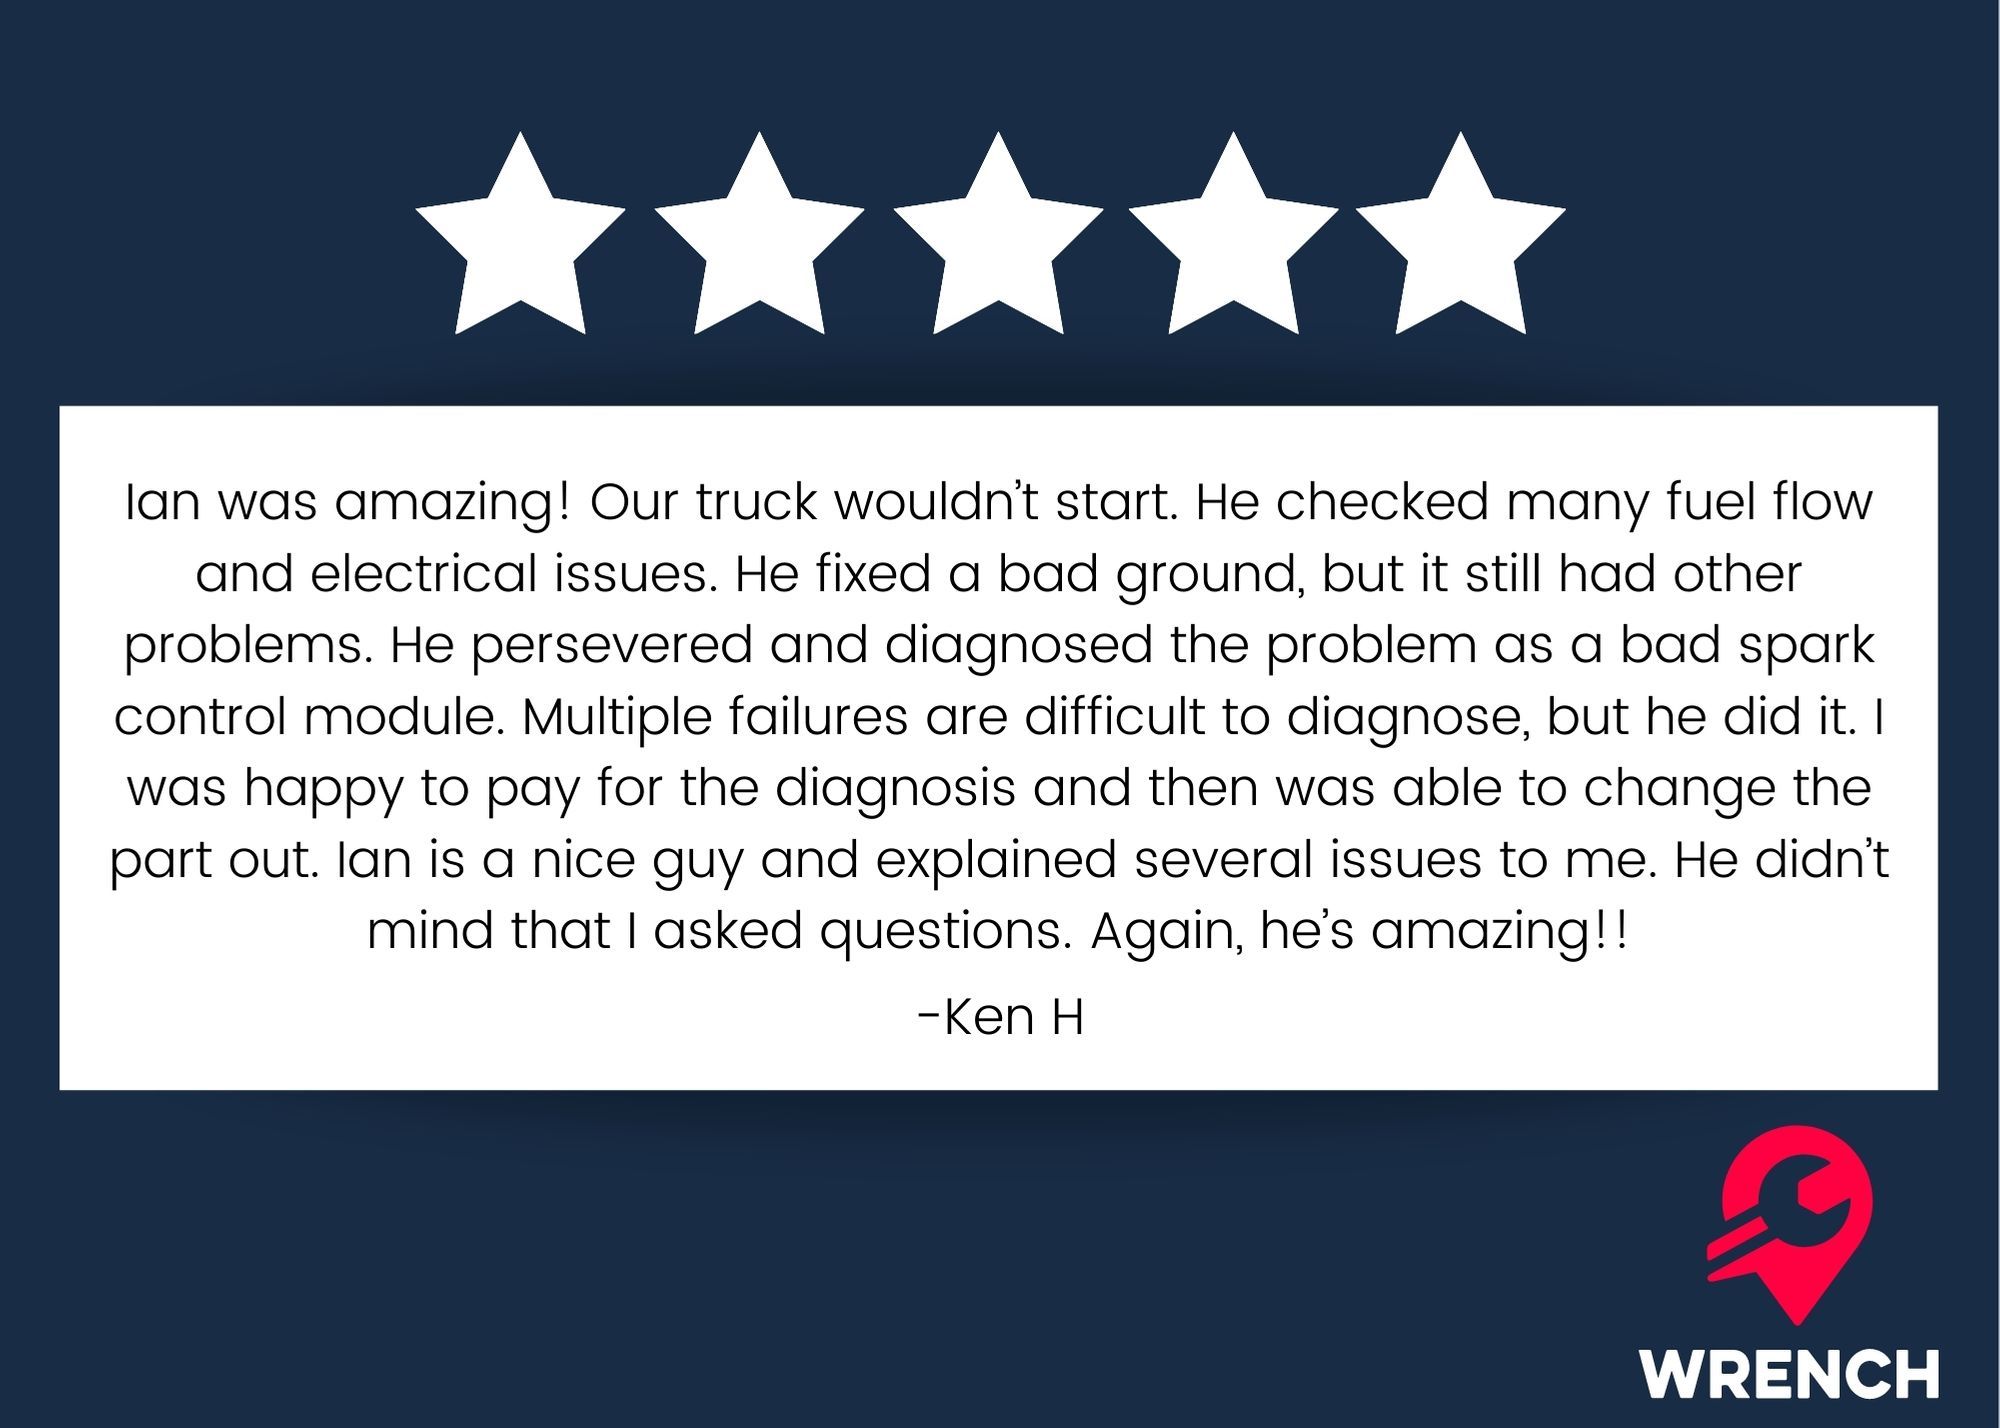 Mobile Truck Repair Five Star Customer Review For Wrench